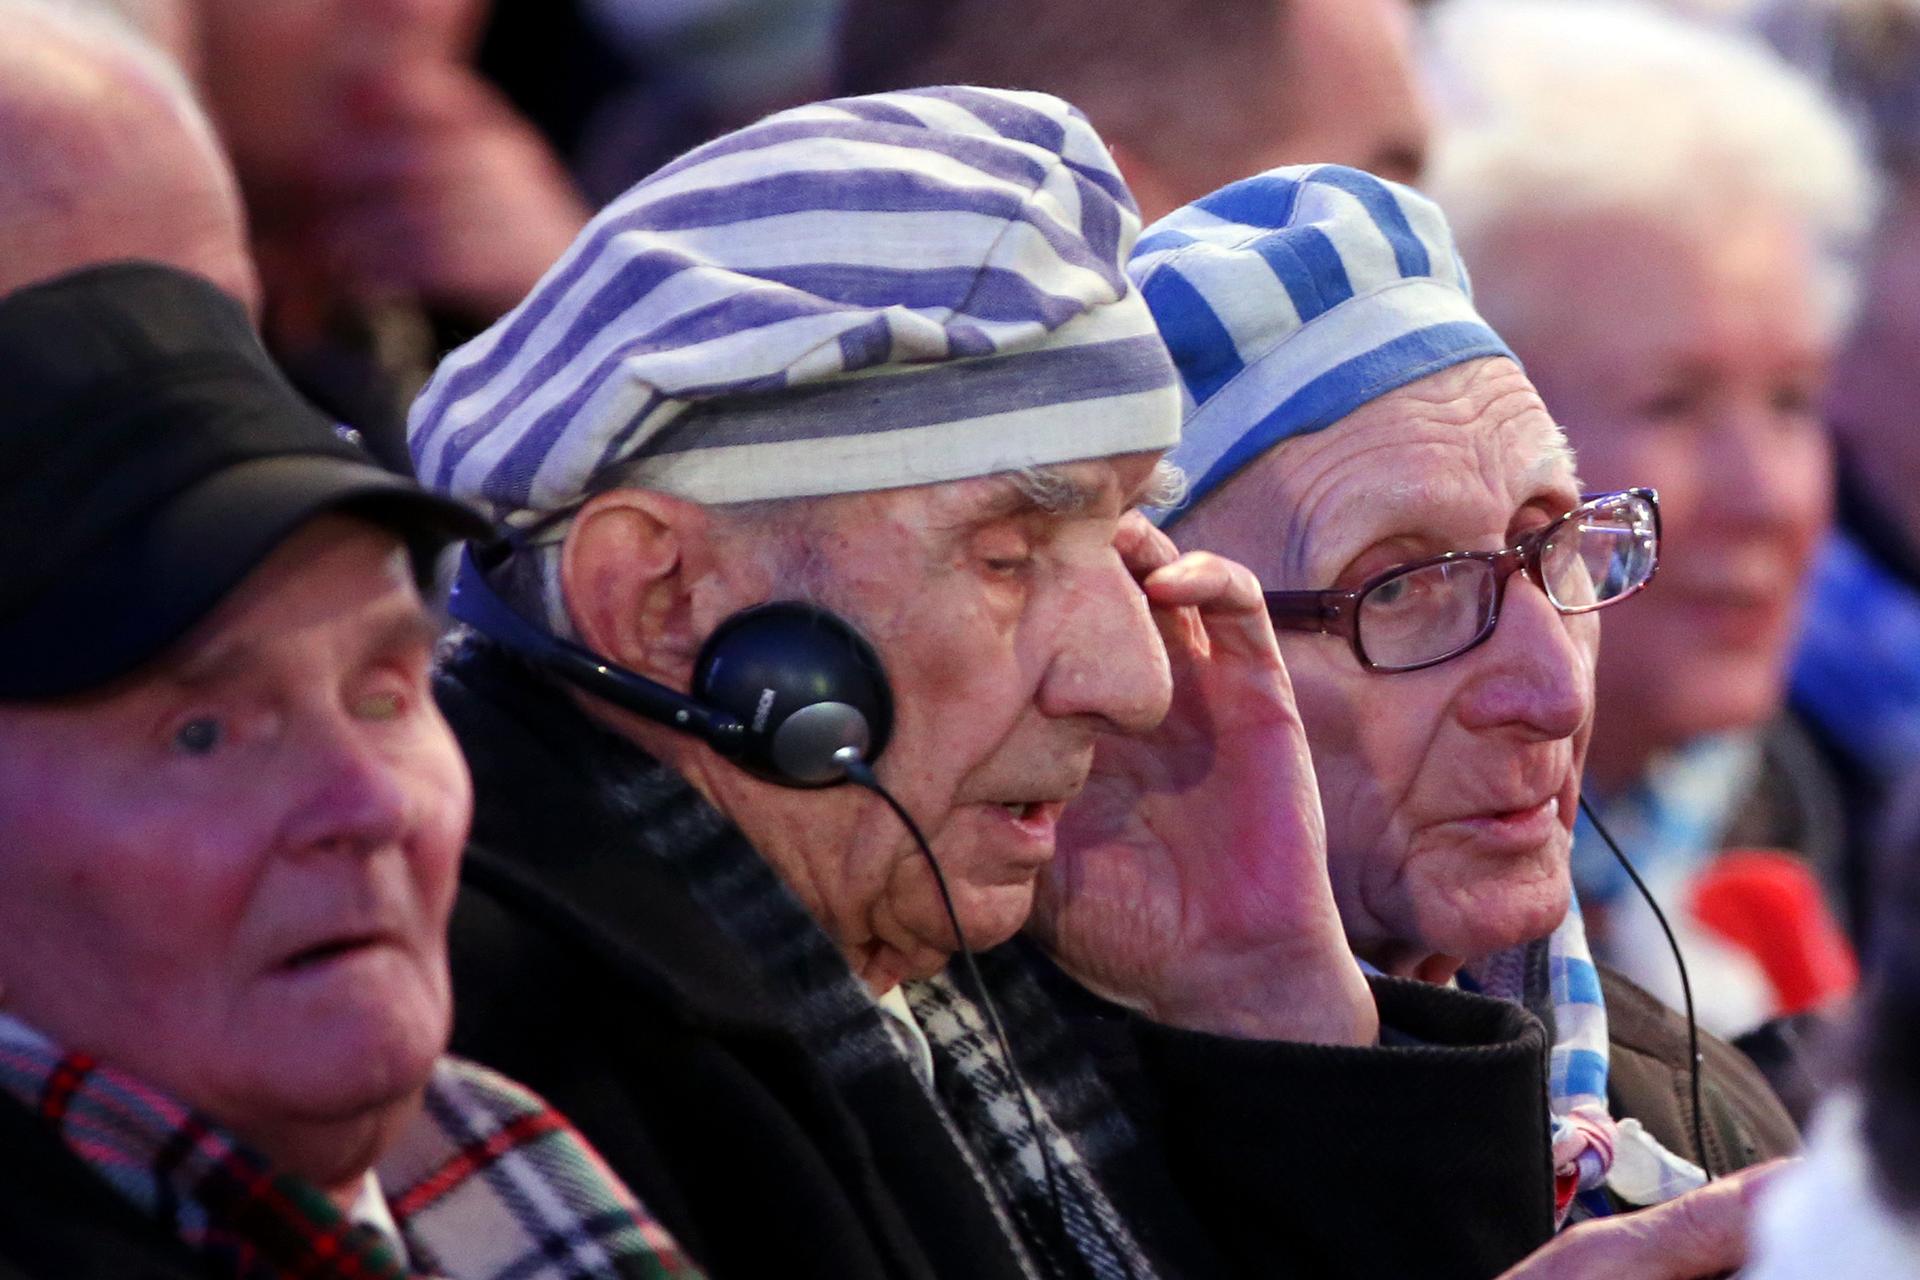 Survivors attend a ceremony on the site of the former Nazi German concentration and extermination camp Auschwitz-Birkenau in Poland. Tuesday marked the 70th anniversary of the Nazi camp's liberation by Allied soldiers.